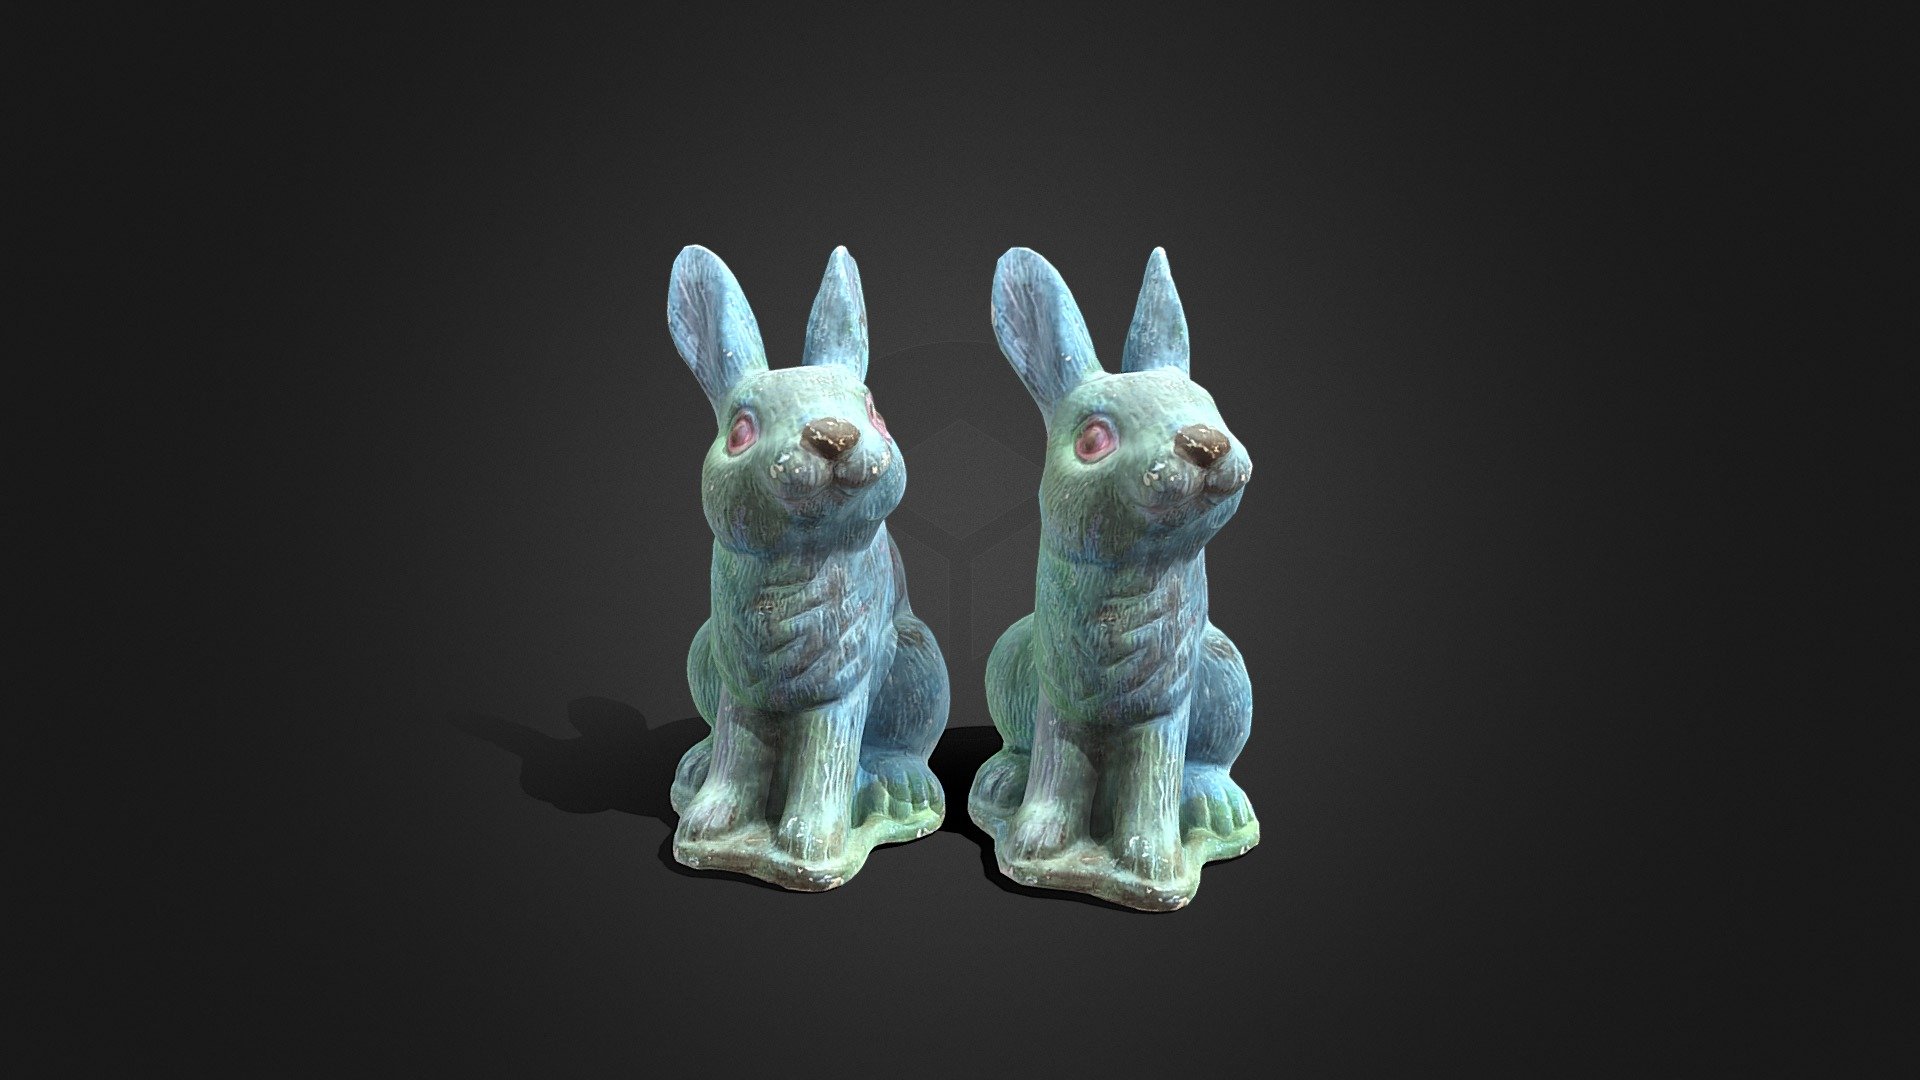 3d model of a Rabbit statue photogrammetry. (PBRtexture )




This product is made by 3df Zephyr and ready to render in Blender Cycle. Unit setup is metres and the models are scaled to match real life objects. 




The model comes with textures and materials and is positioned in the center of the coordinates system.




No additional plugin is needed to open the model.




Notes:




Geometry: Polygonal




Textures: Yes 




Rigged: No




Animated: No




UV Mapped: Yes




Unwrapped UVs: Yes, non-overlapping




Bake normal map




Note: don't forget to take a few seconds to rate this product, your support will allow me to continue working.



Thanks in advance for your help and happy blending!




Hope you like it! Thank you!

My youtube channel: toss90 - Rabbit Statue - Buy Royalty Free 3D model by Toss90 3d model